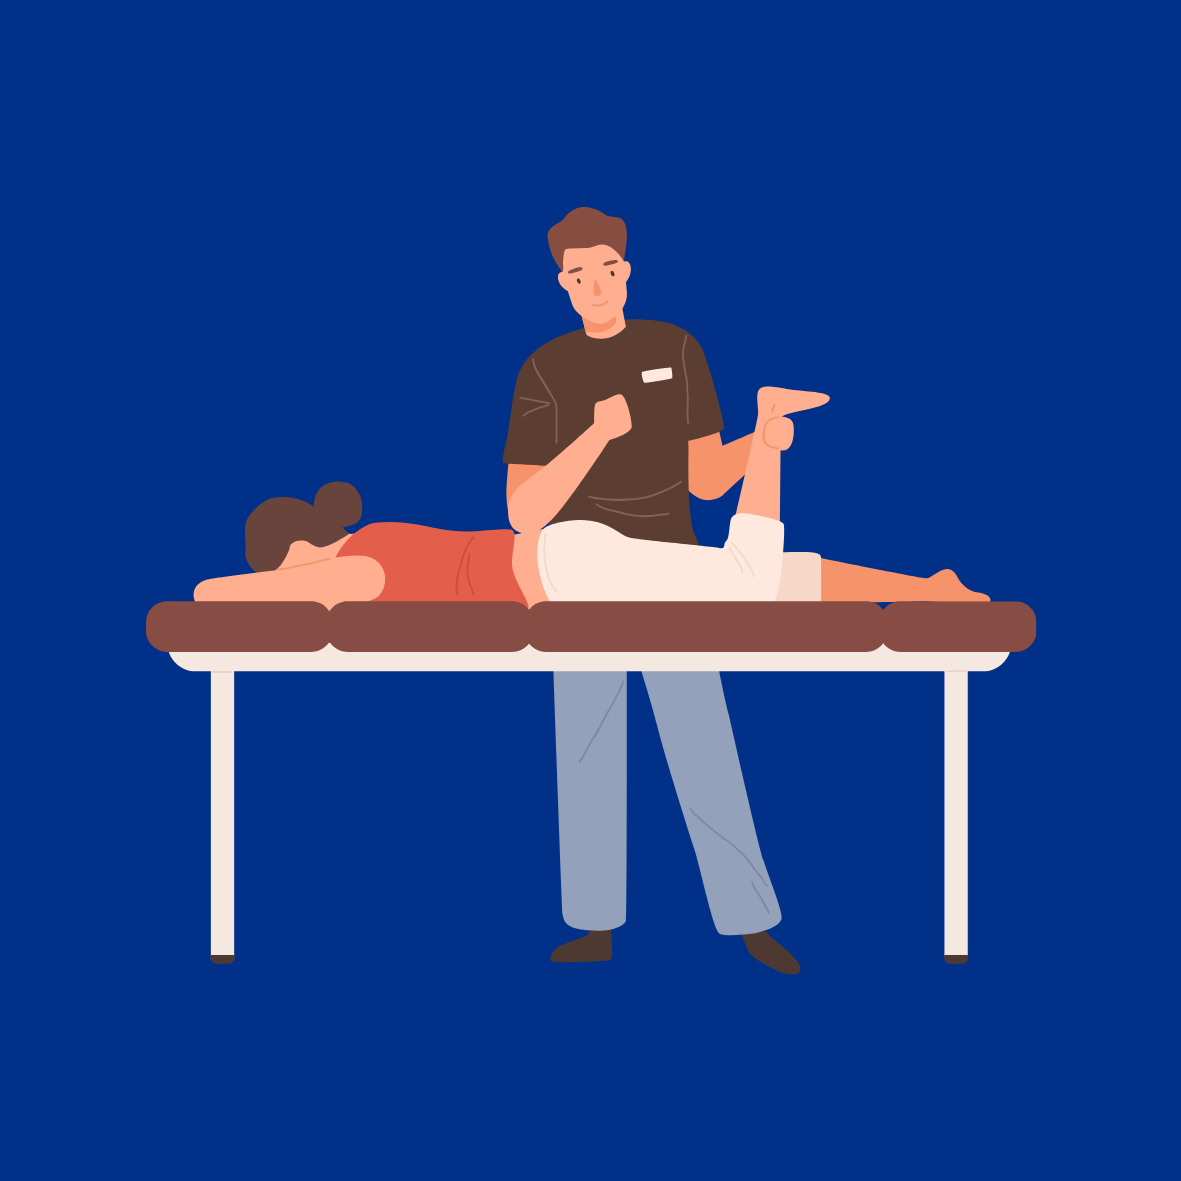 Image of Physiotherapist Treating a Patient